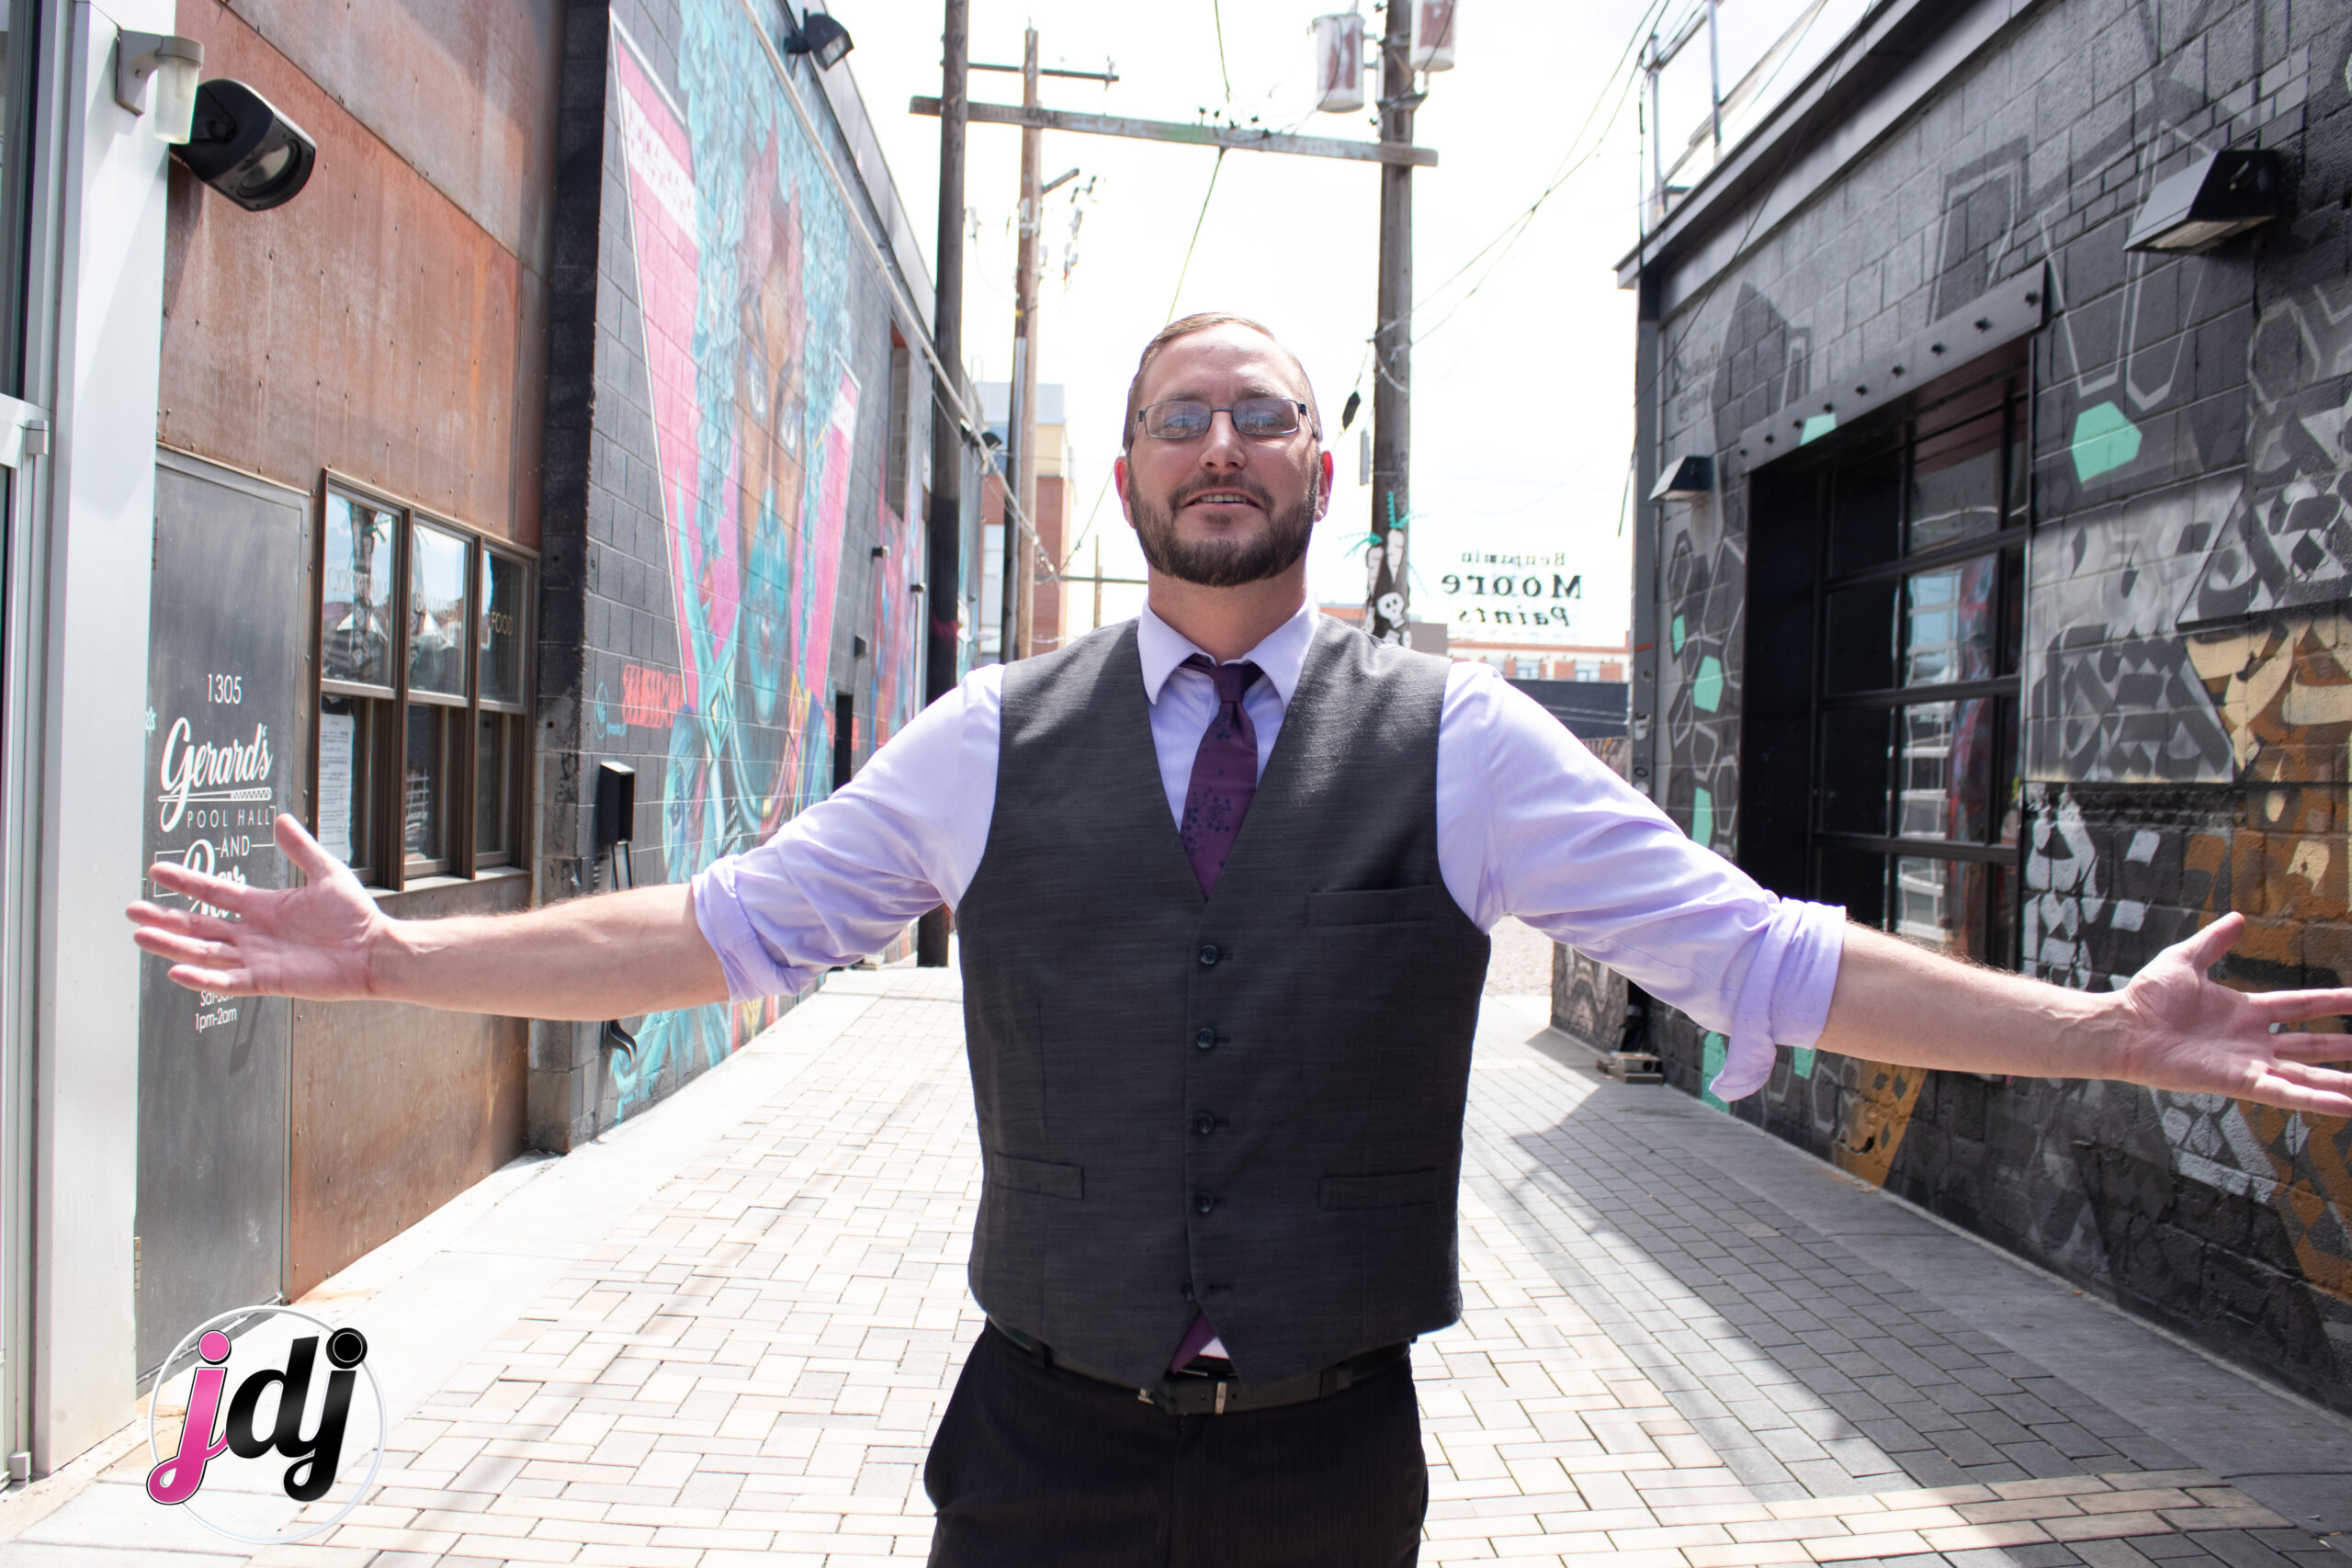 A man wearing a vest and tie, representing a DJ service, standing in an alley.